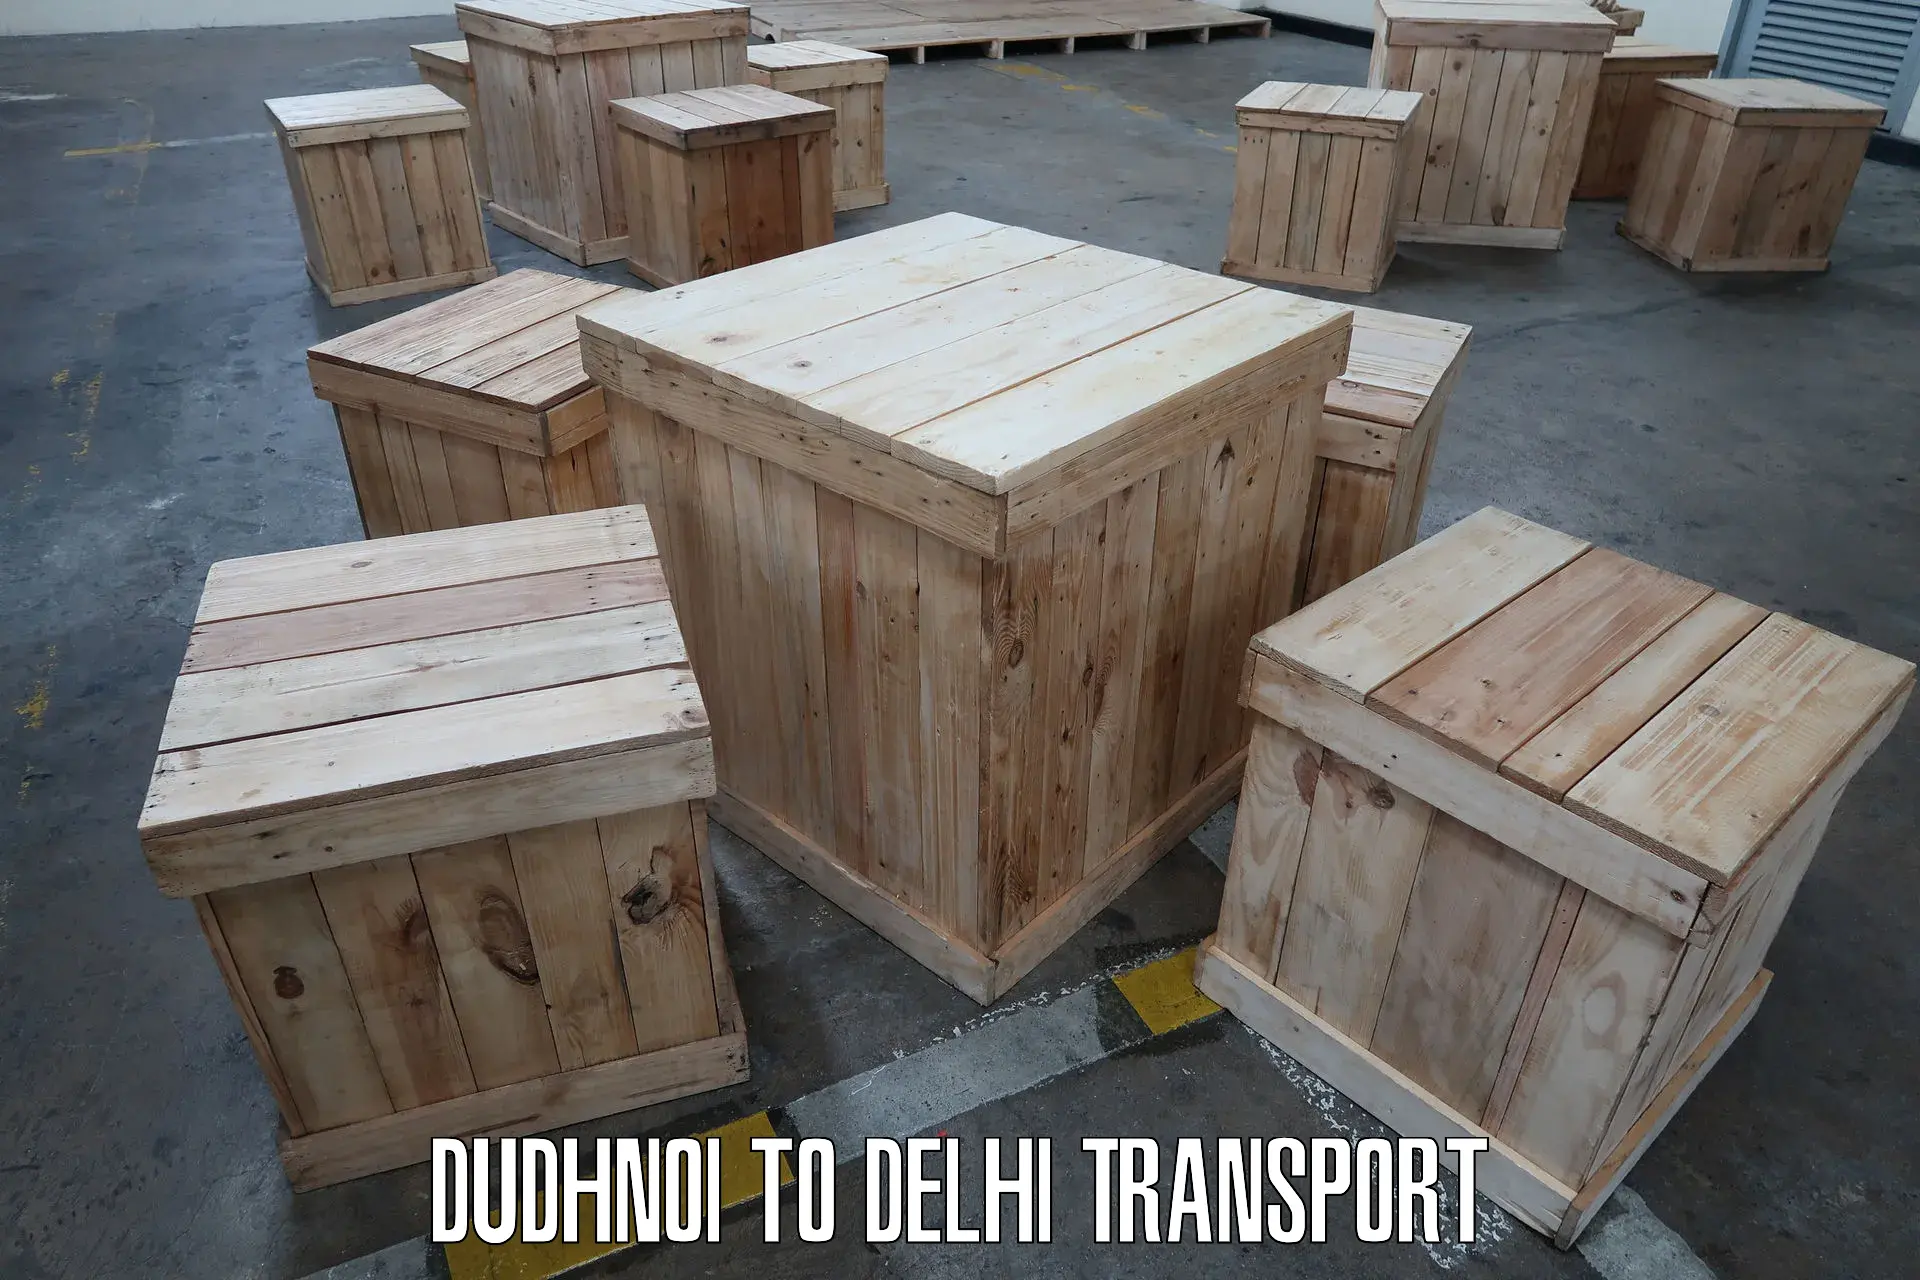 Parcel transport services Dudhnoi to NCR